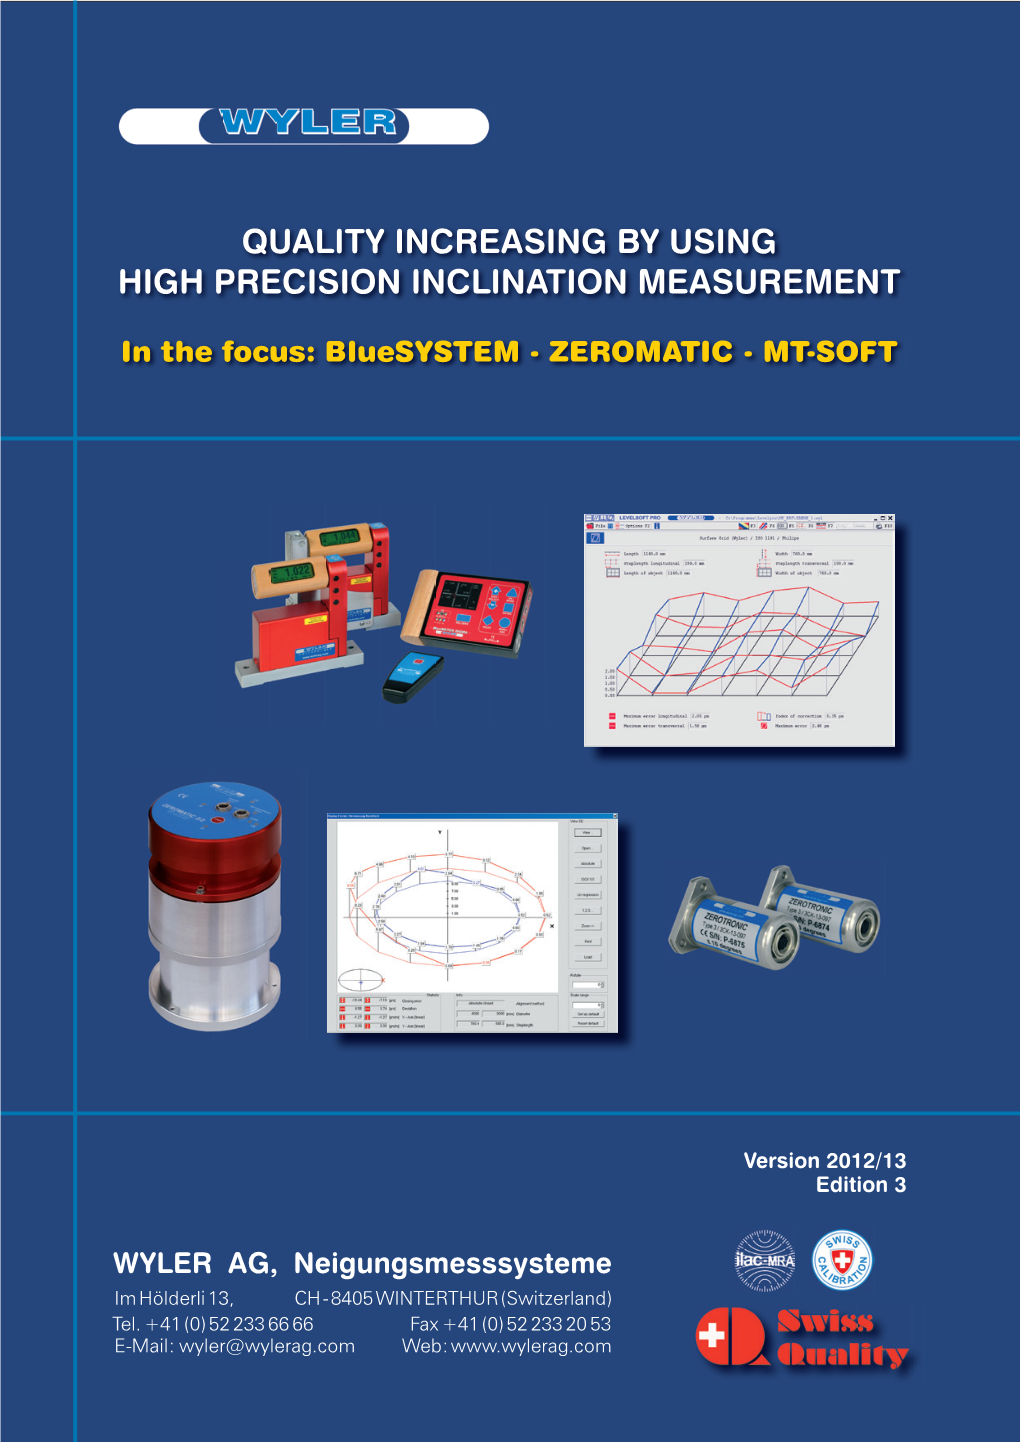 Quality Increasing by Using High Precision Inclination Measurement